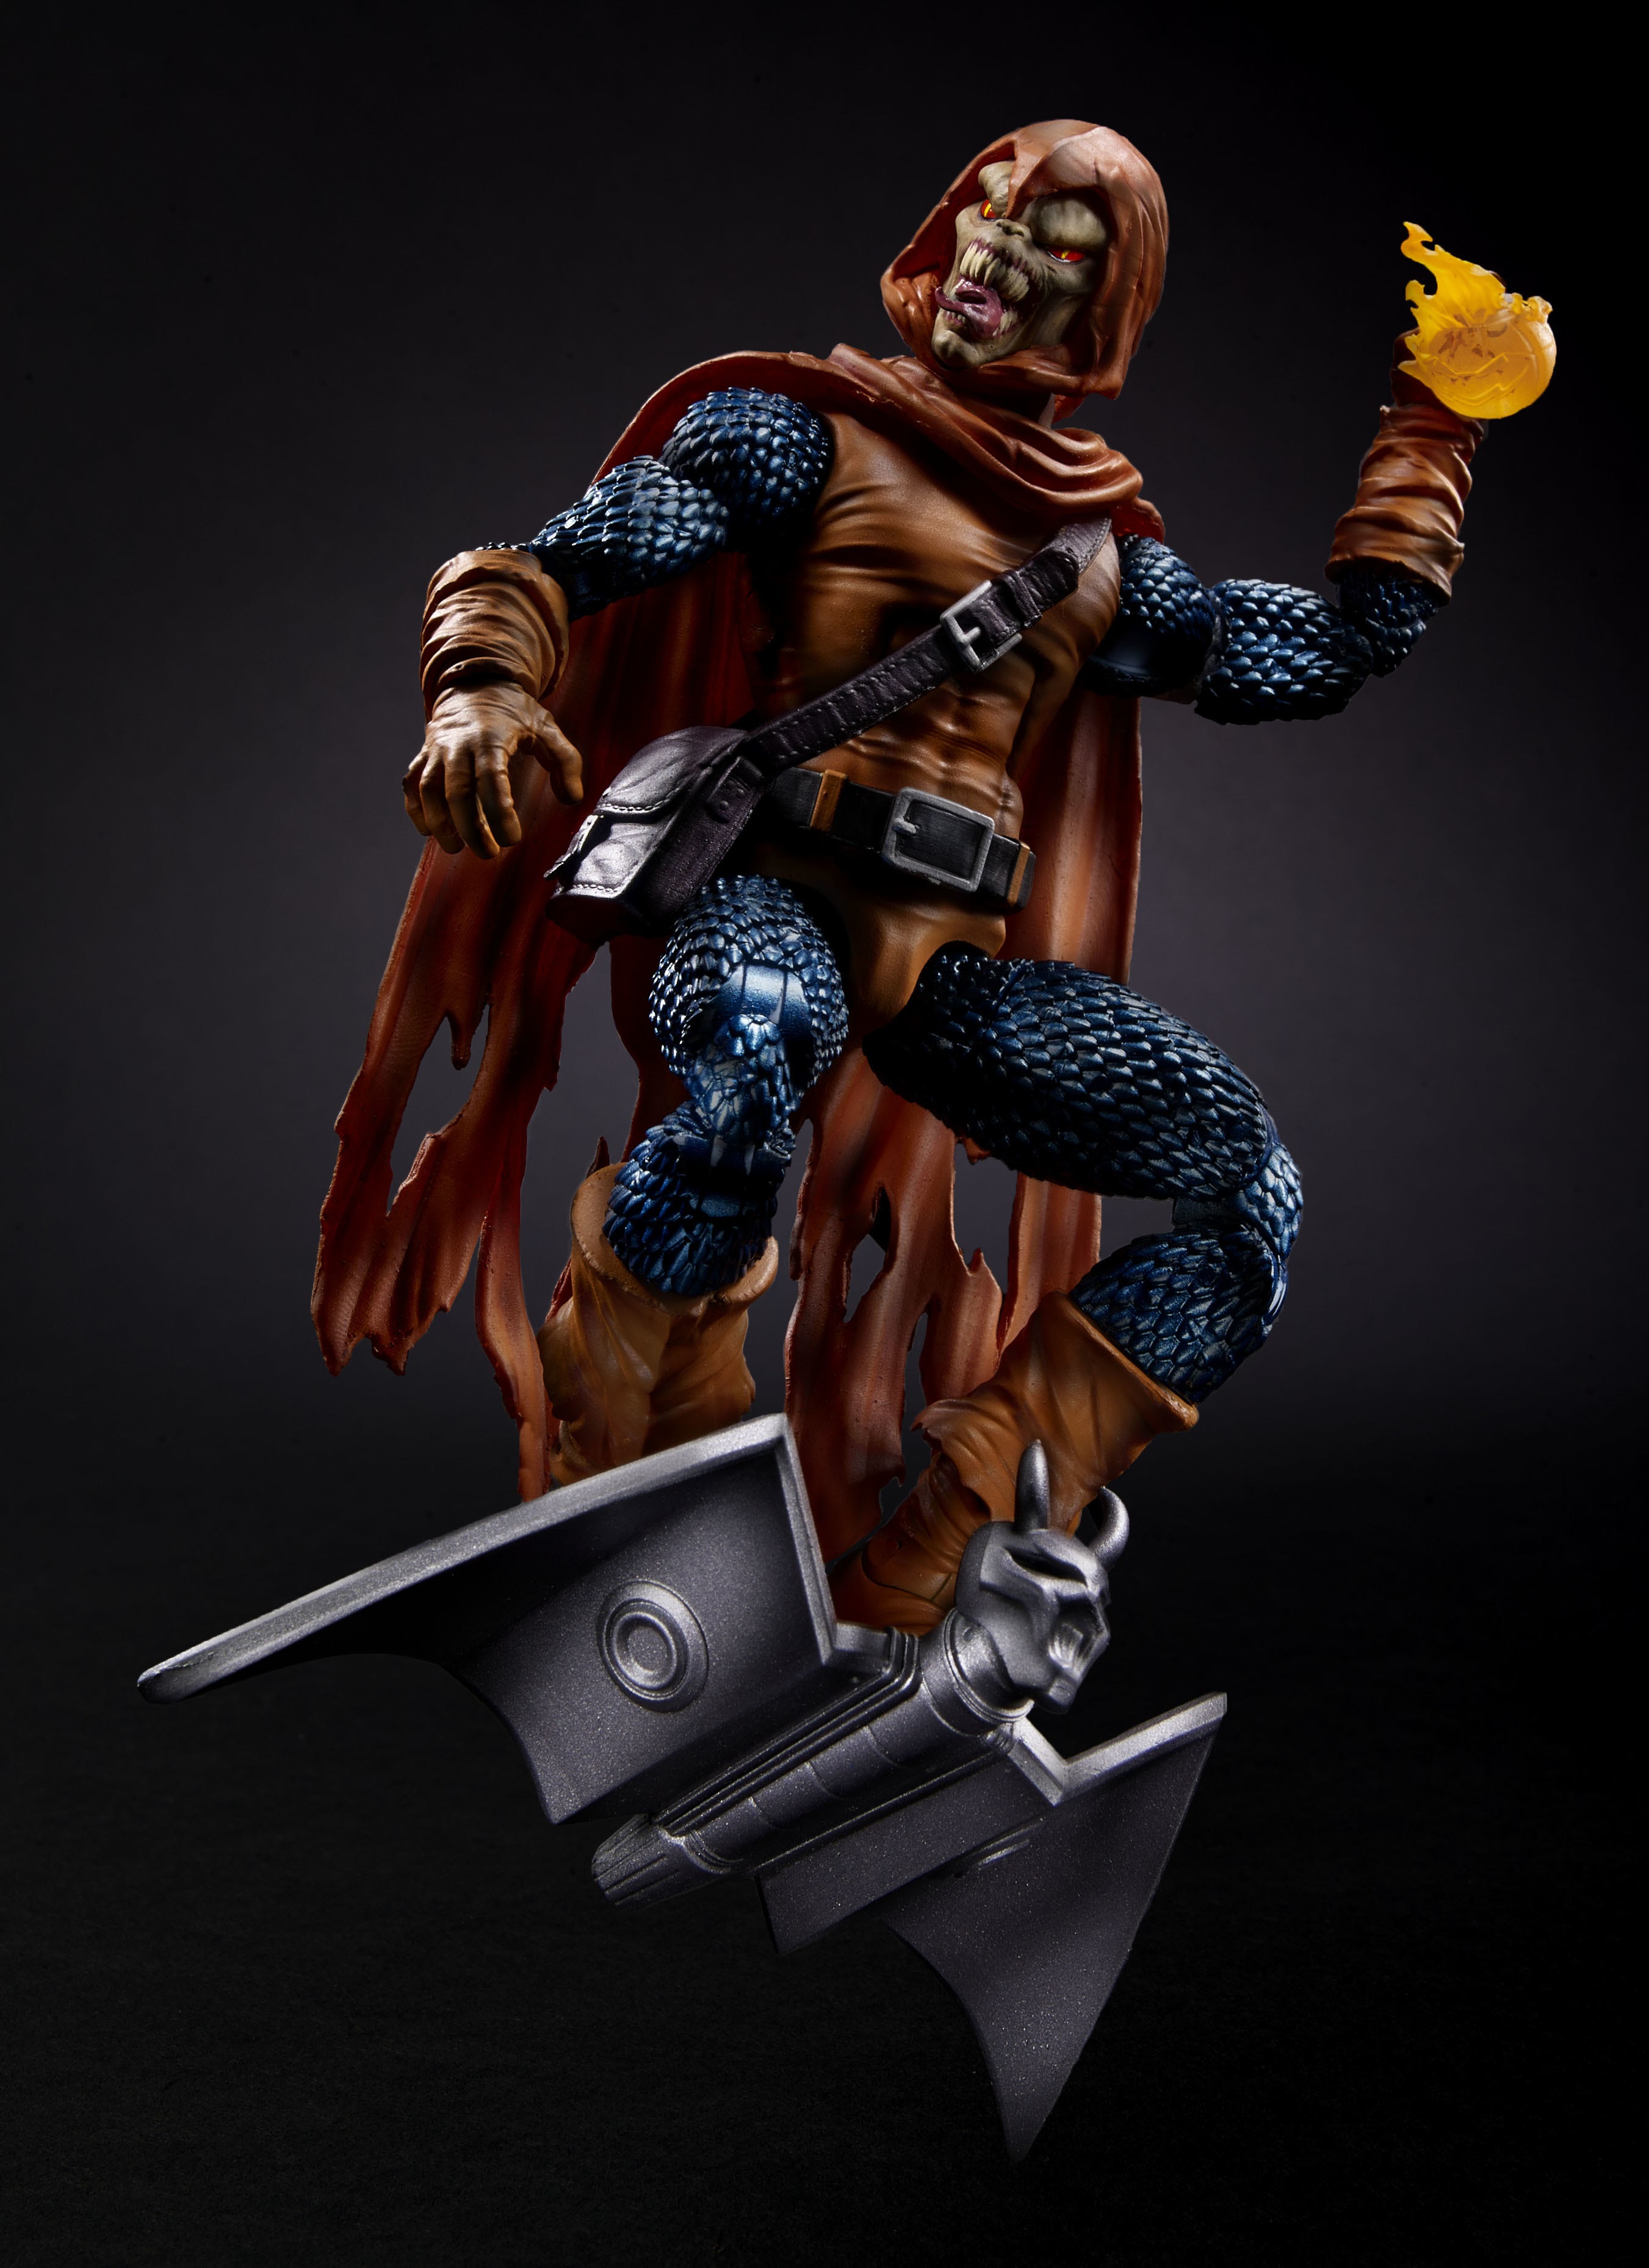 SpiderMan6inchHobgoblin Large 300DPI Large Batch of Hasbro Marvel & Star Wars Figure Images From Toy Fair